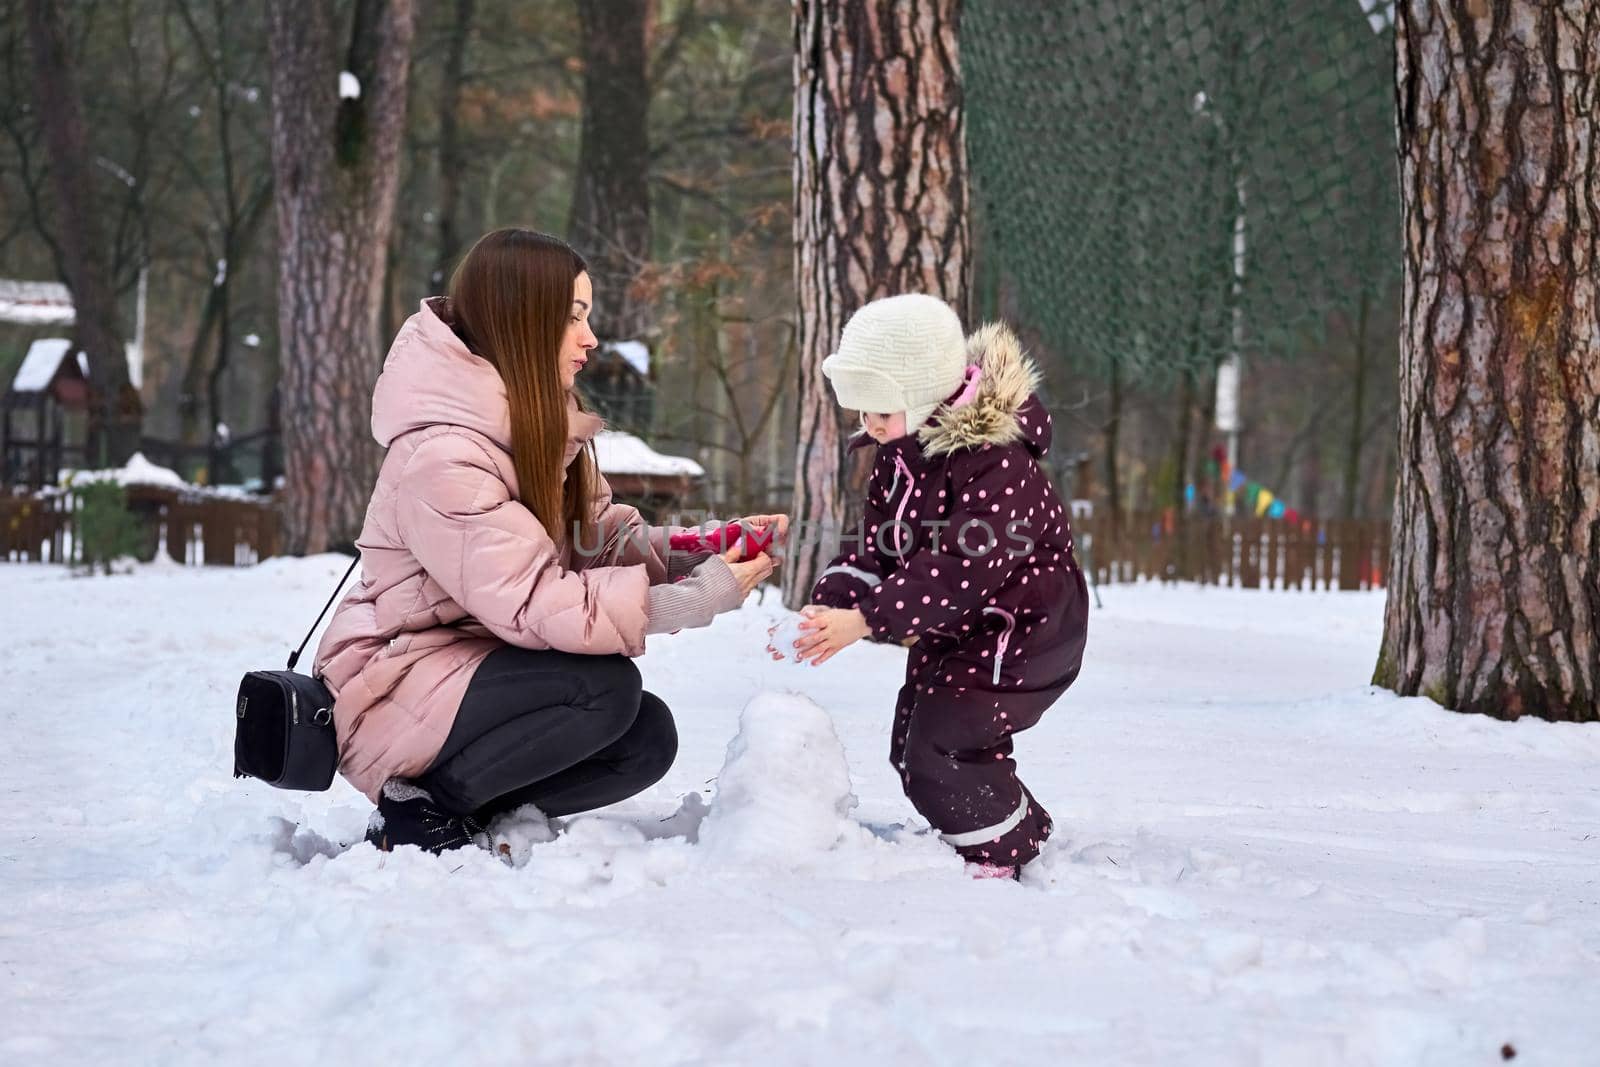 a woman in relation to her child or childrenCaring mother puts gloves on her child on a winter day.